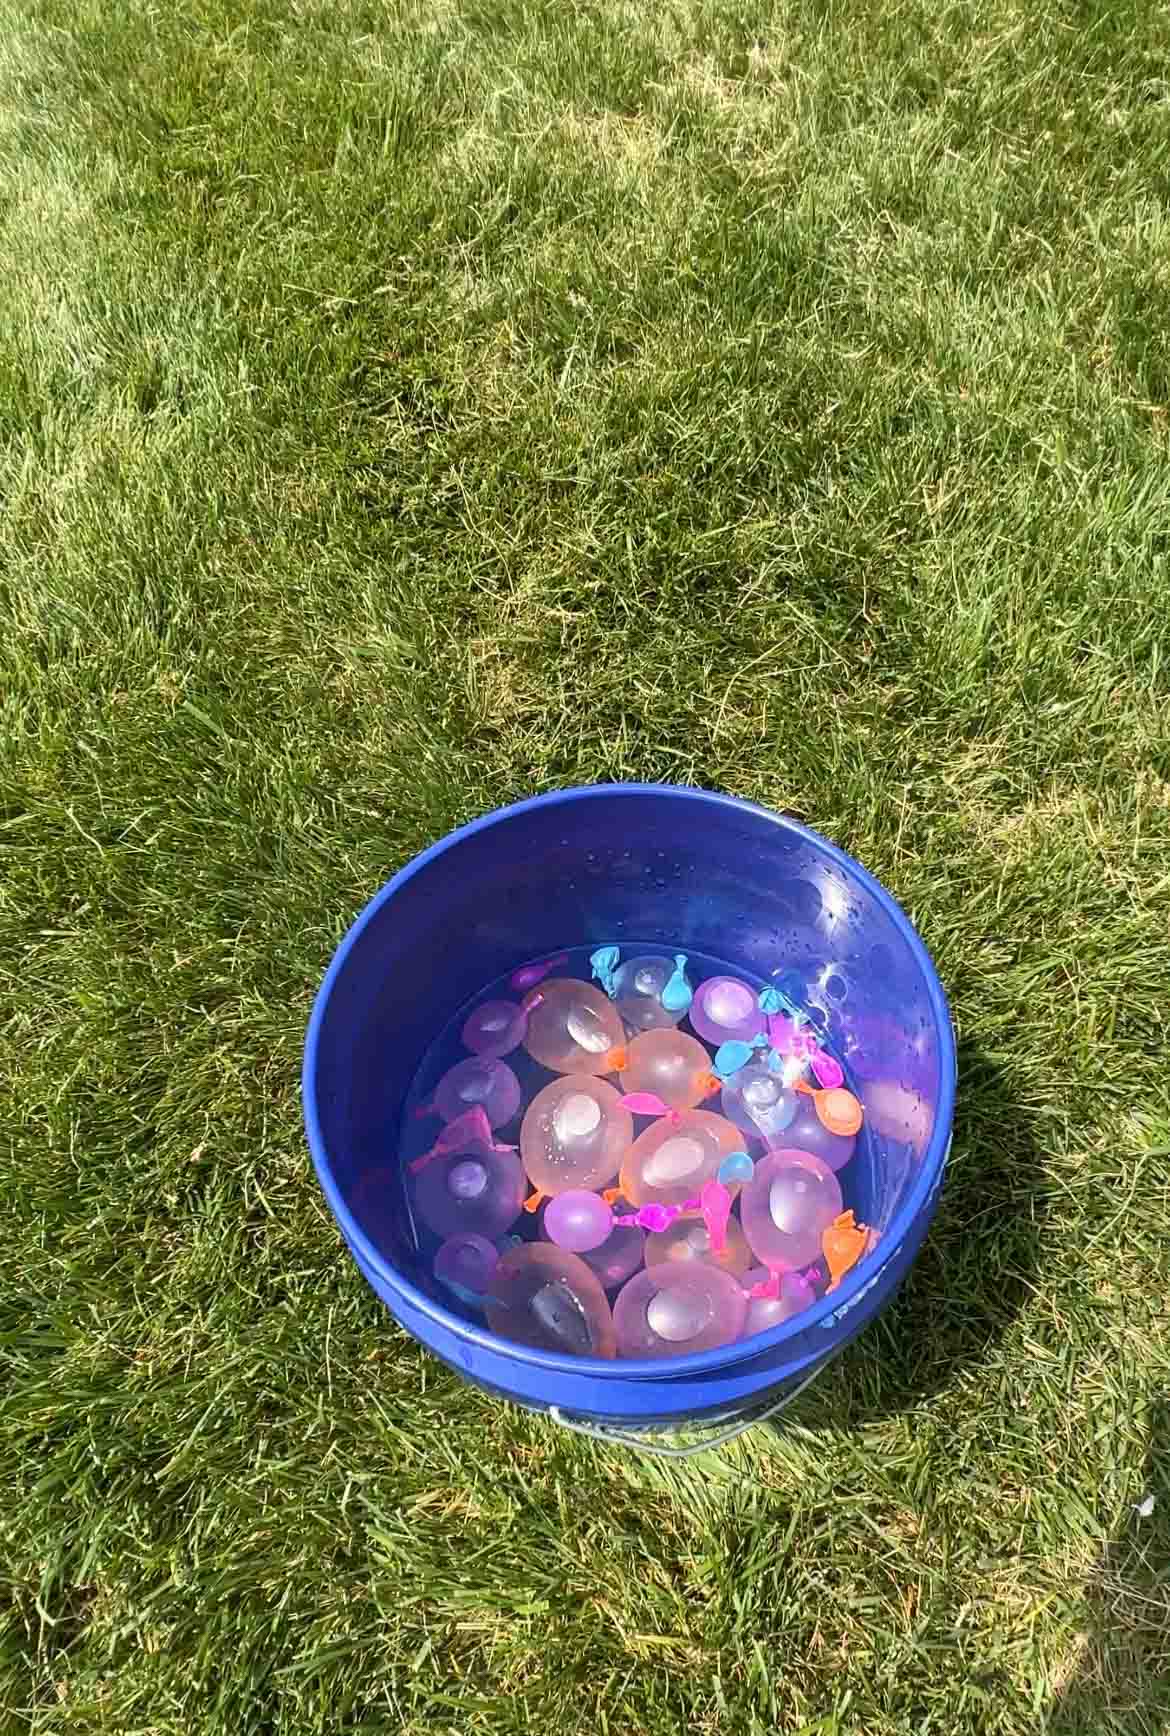 bucket filled with water balloons